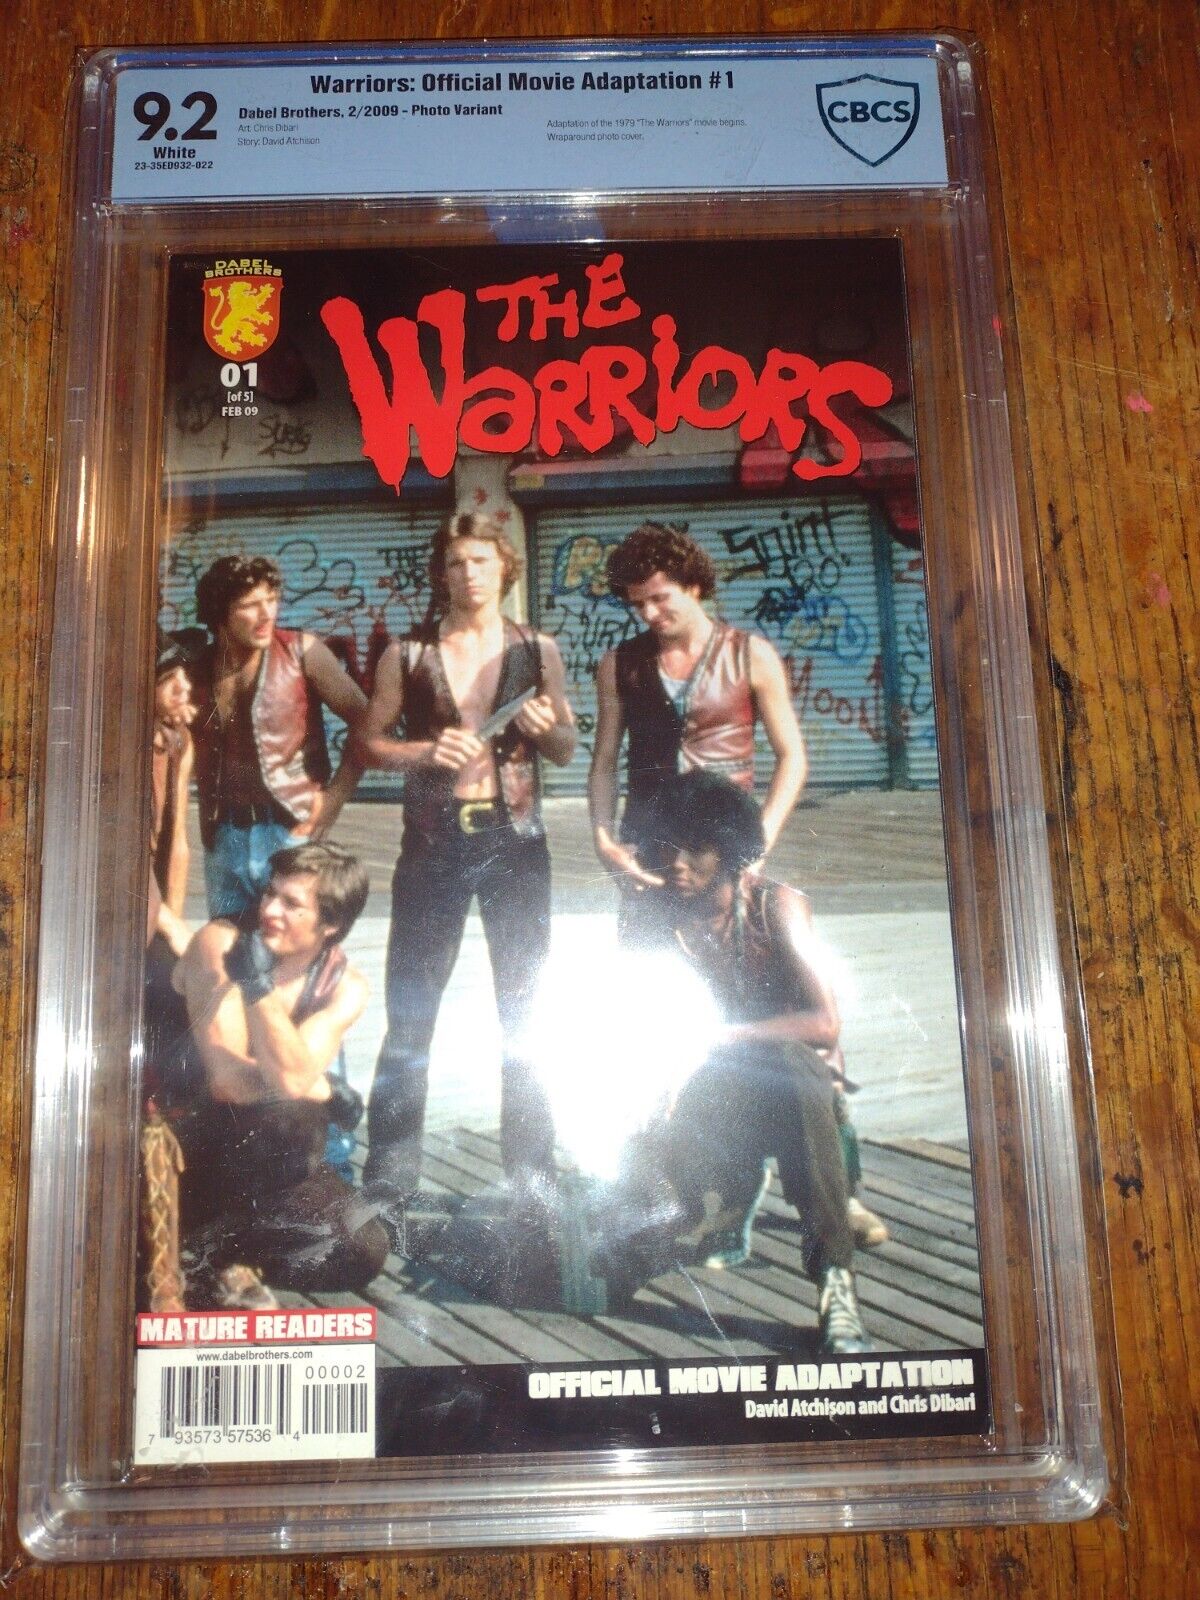 The Warriors: Official Movie Adaptation 1 Dabel Brothers Photo  Variant 9.2 CBCS